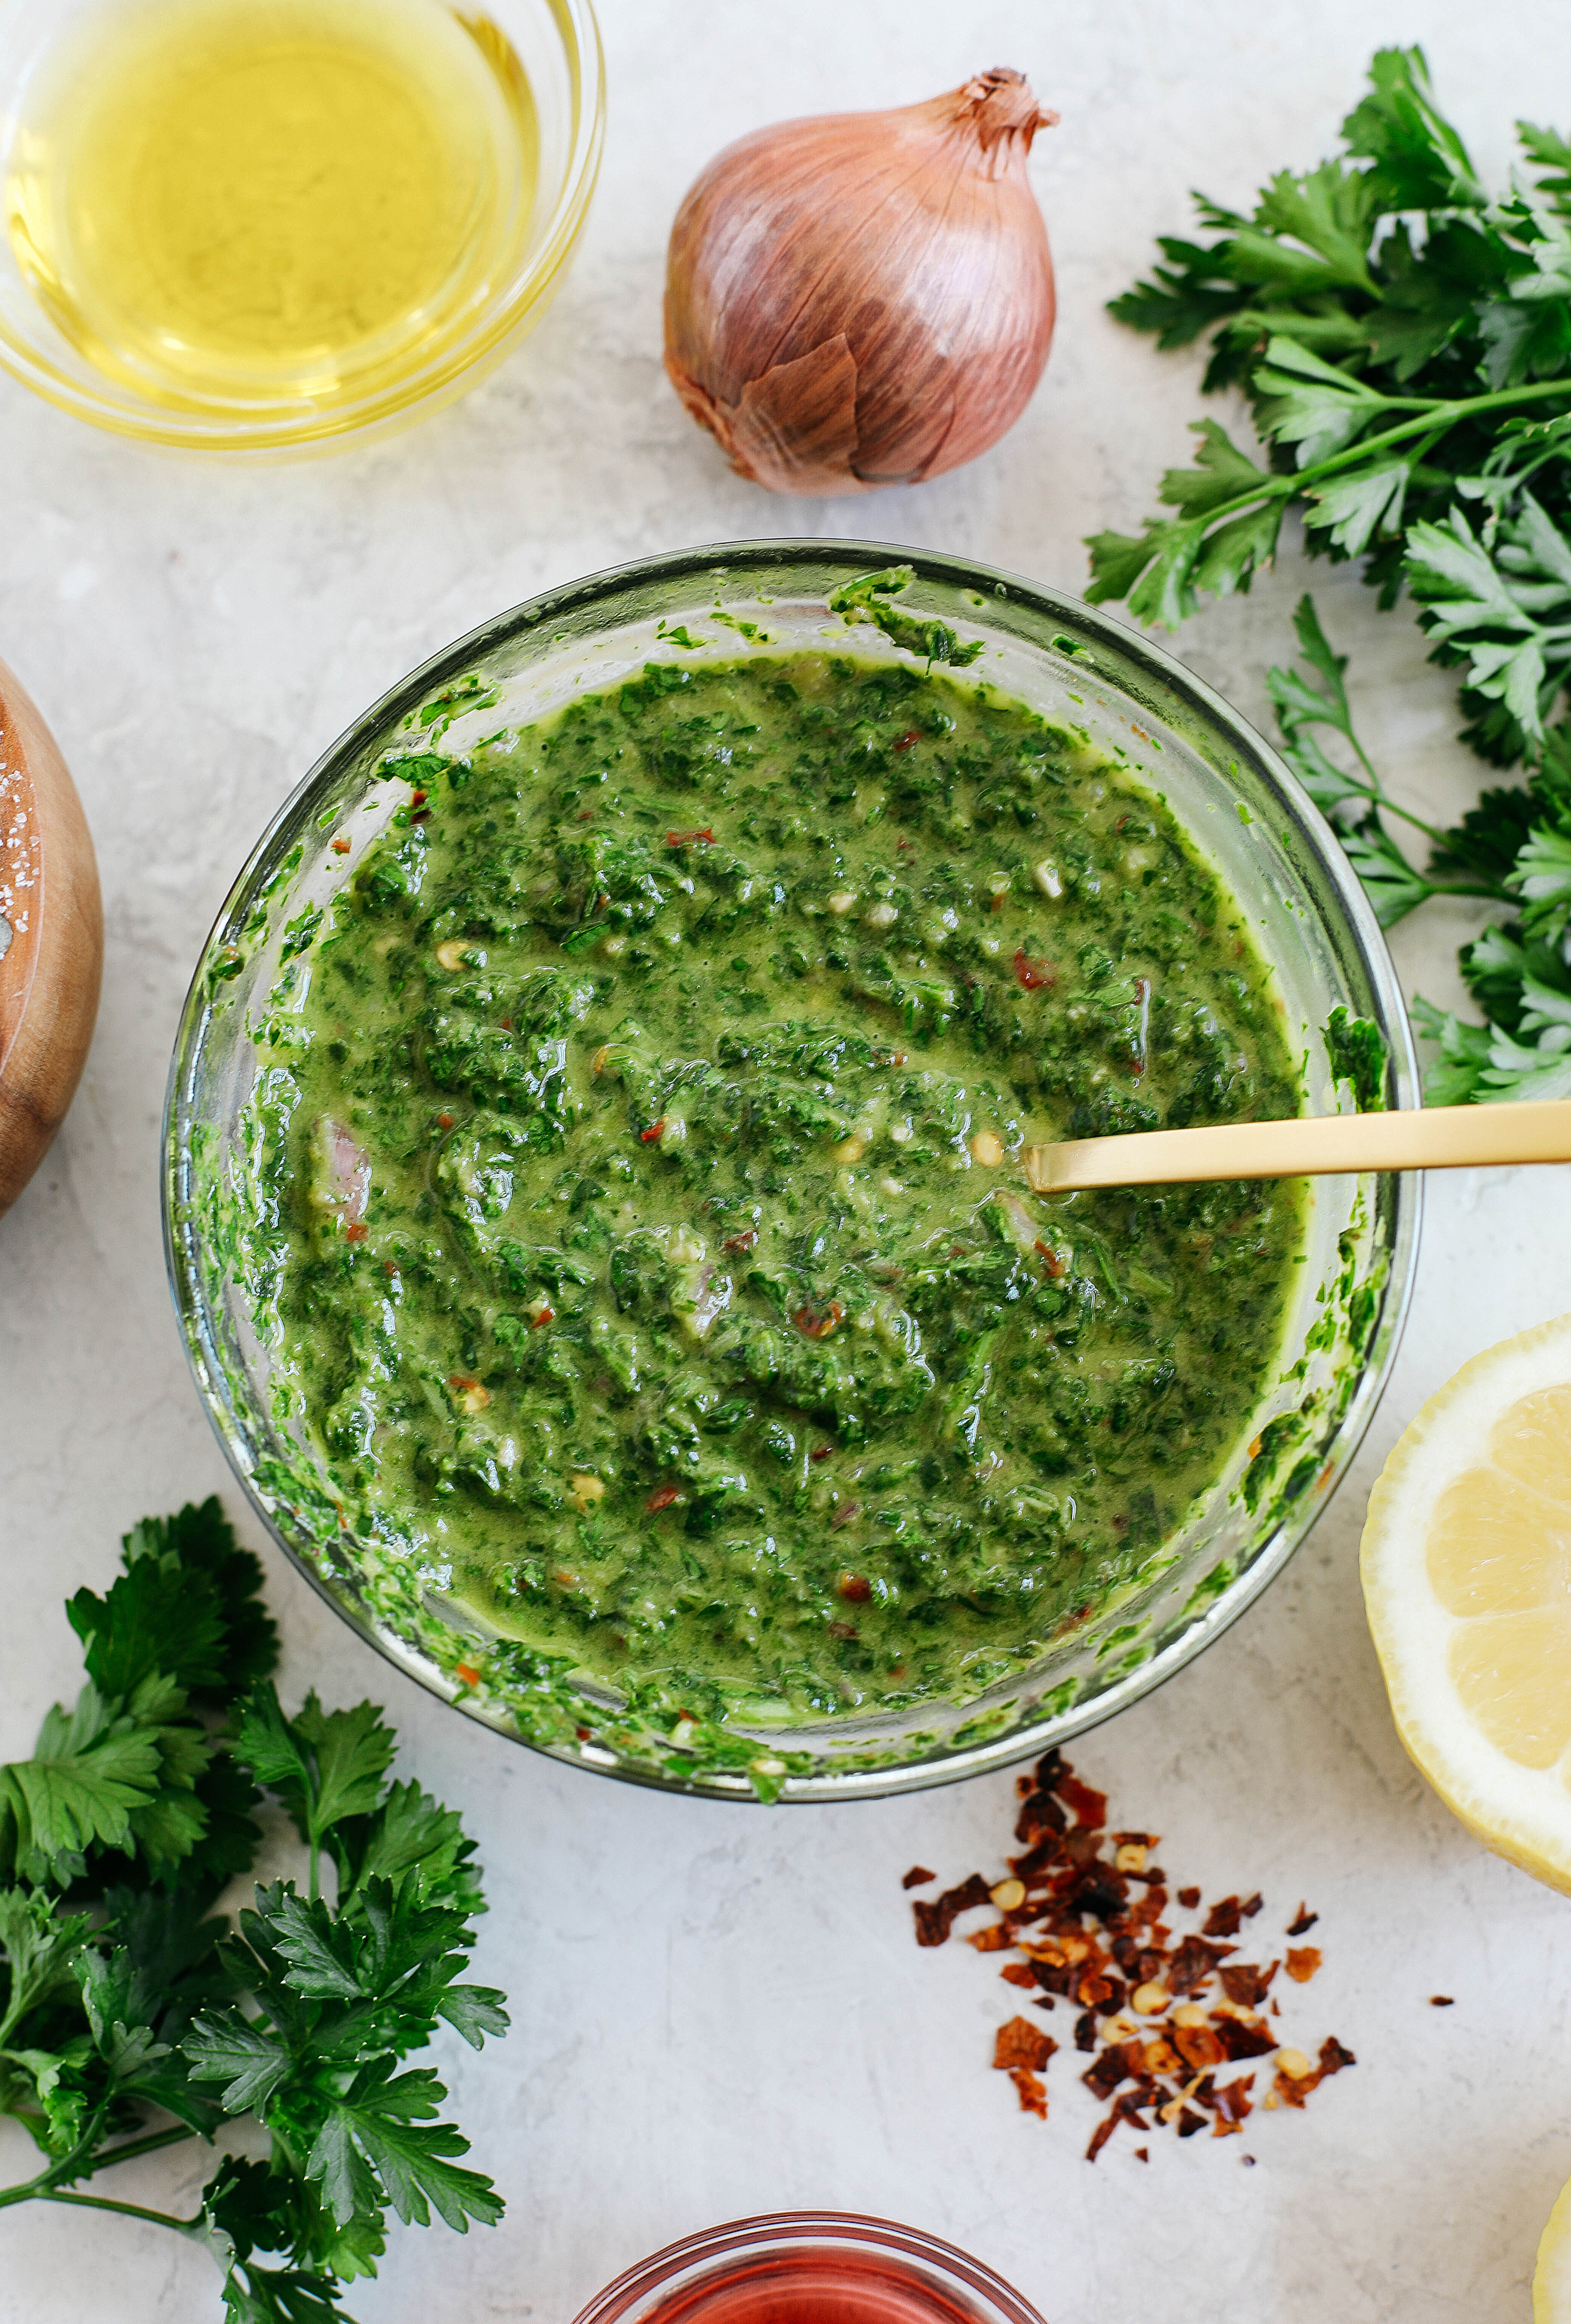 Quick and EASY Chimichurri Sauce perfect for grilling season that is healthy, flavorful and tastes delicious spooned over chicken, fish and even steak!